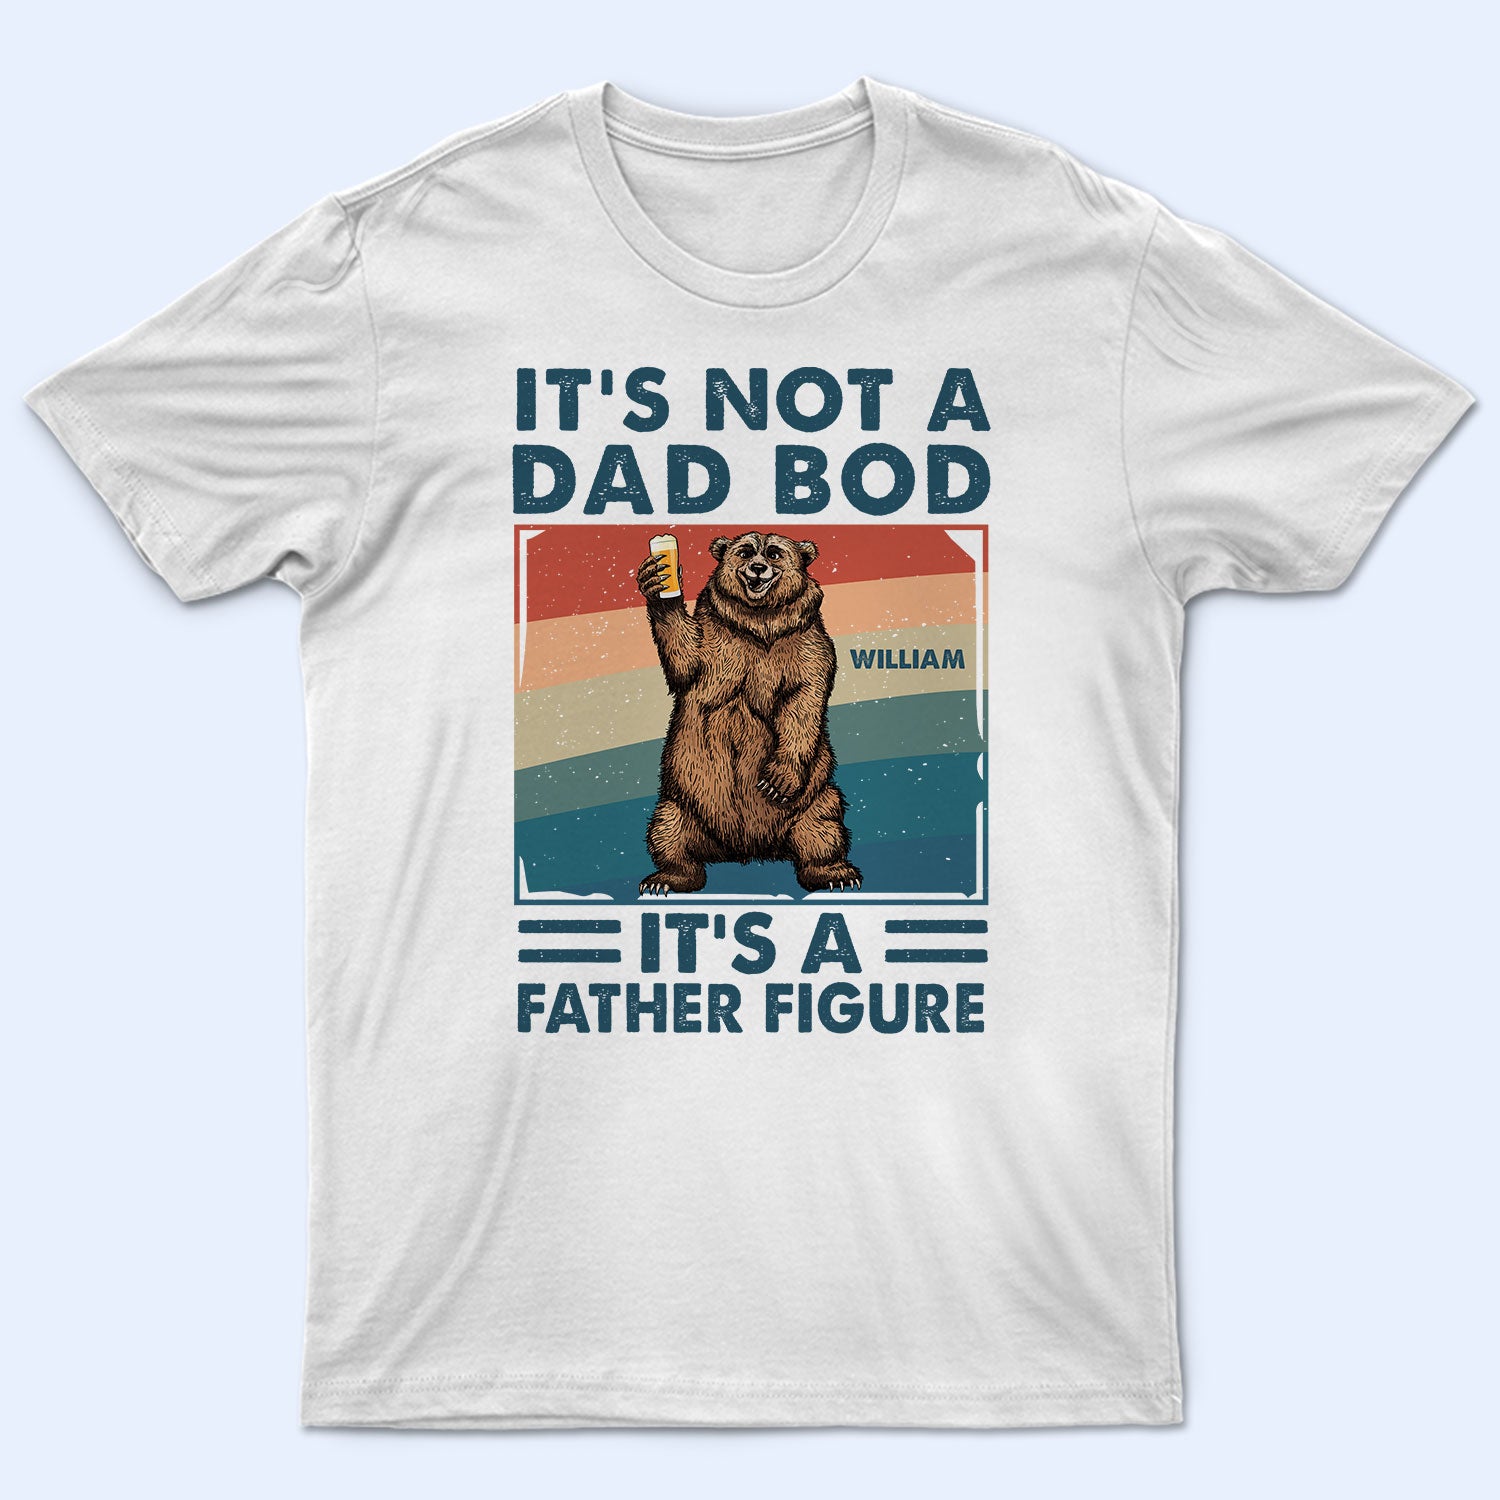 It's Not A Dad Bod - Funny Gift For Dad, Father, Grandpa - Personalized T Shirt